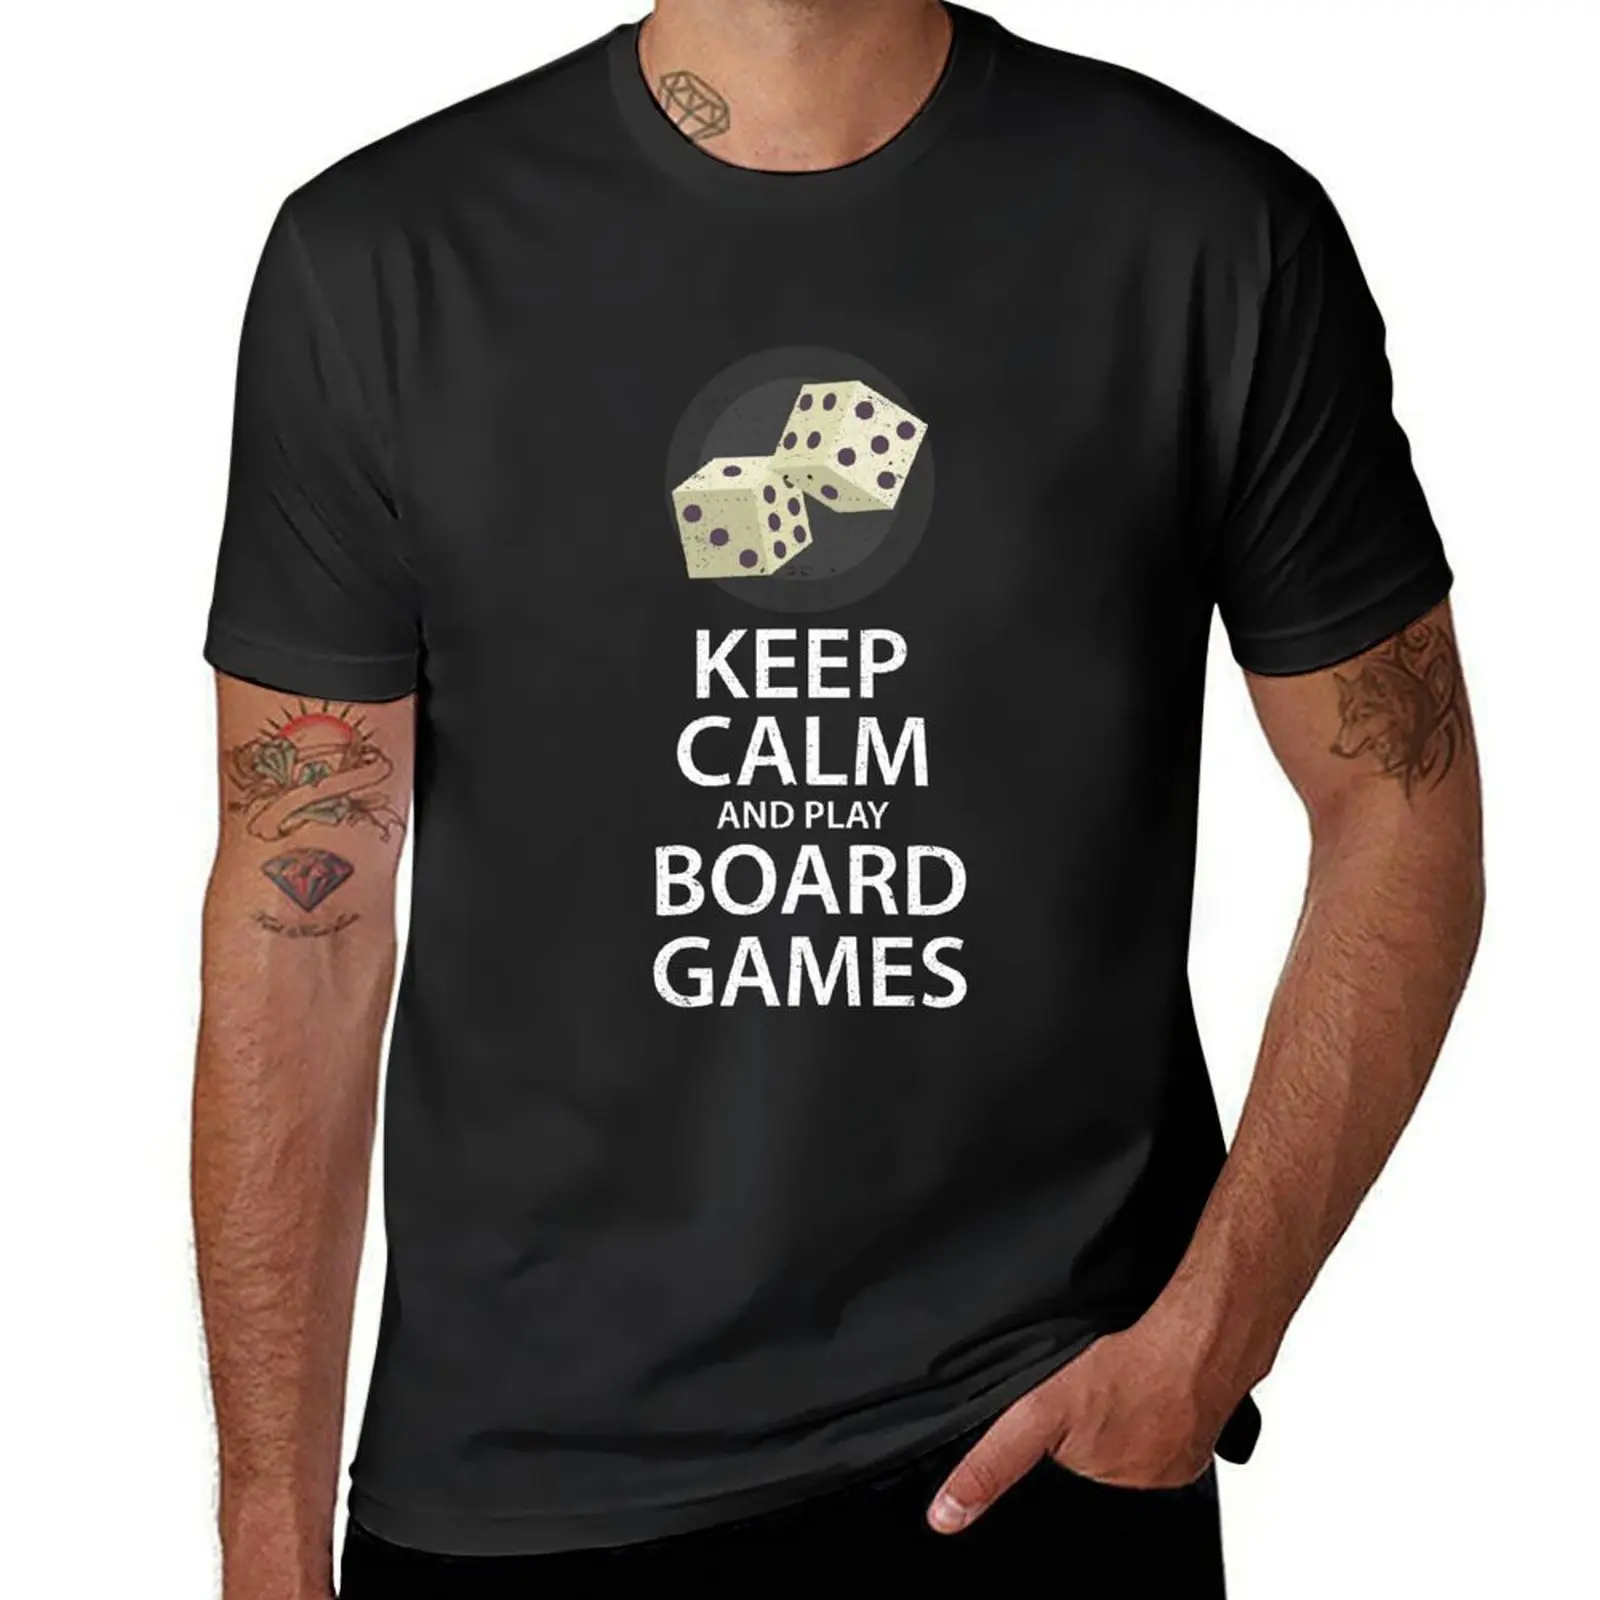 

Keep Calm and Play Board Games T-shirt Aesthetic clothing for a boy plus sizes t shirt for men